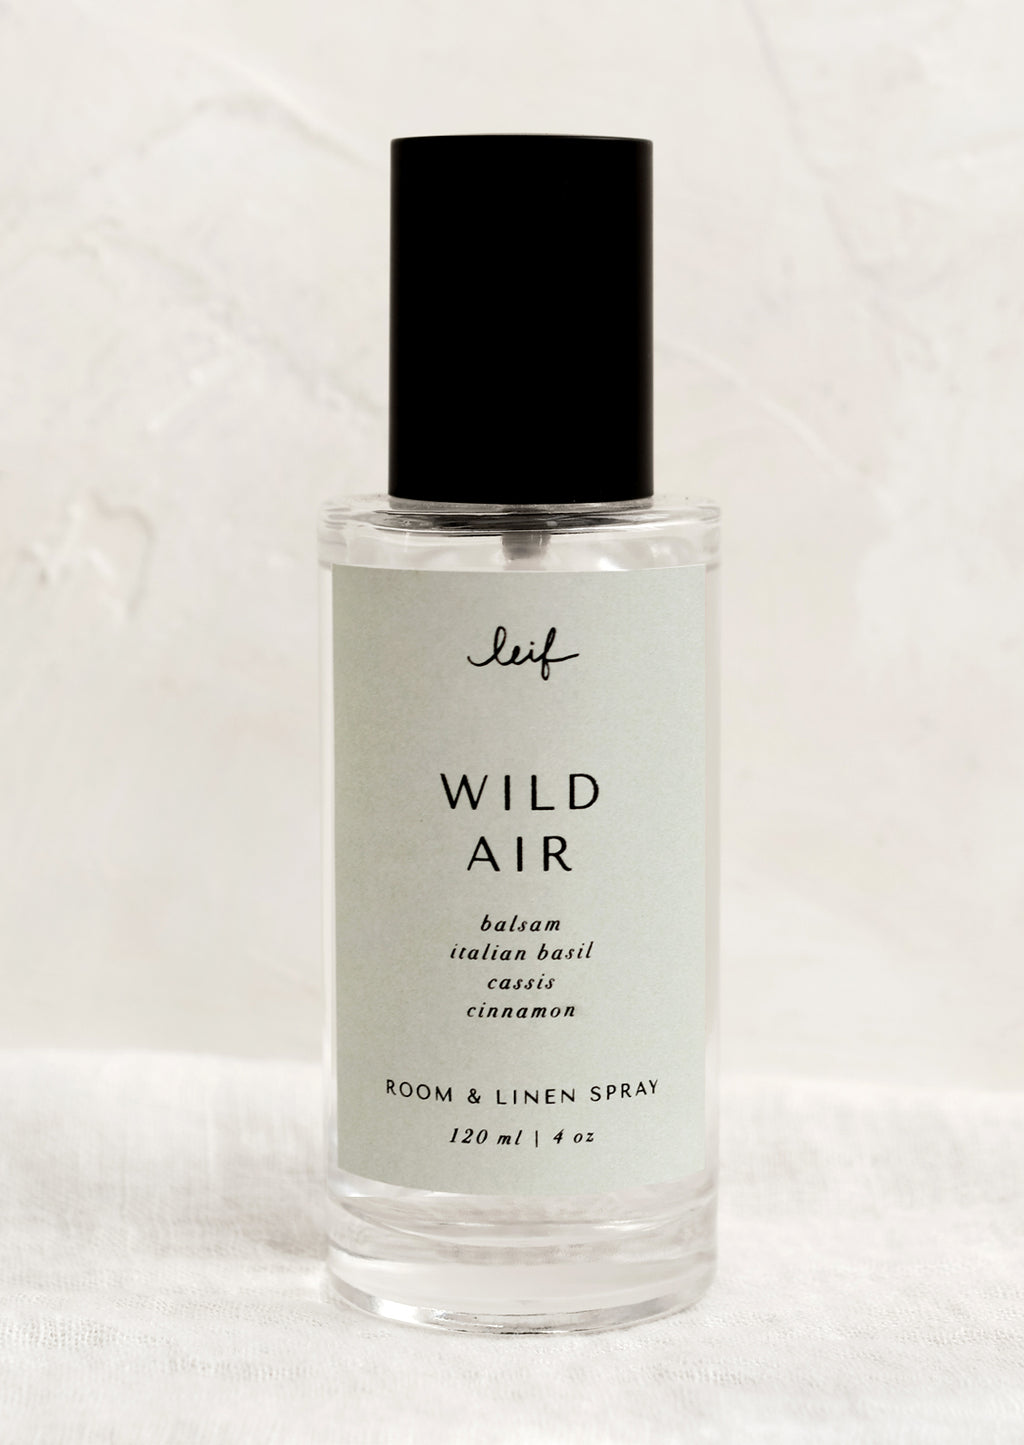 Wild Air: A room spray bottle with printed text on seafoam label.